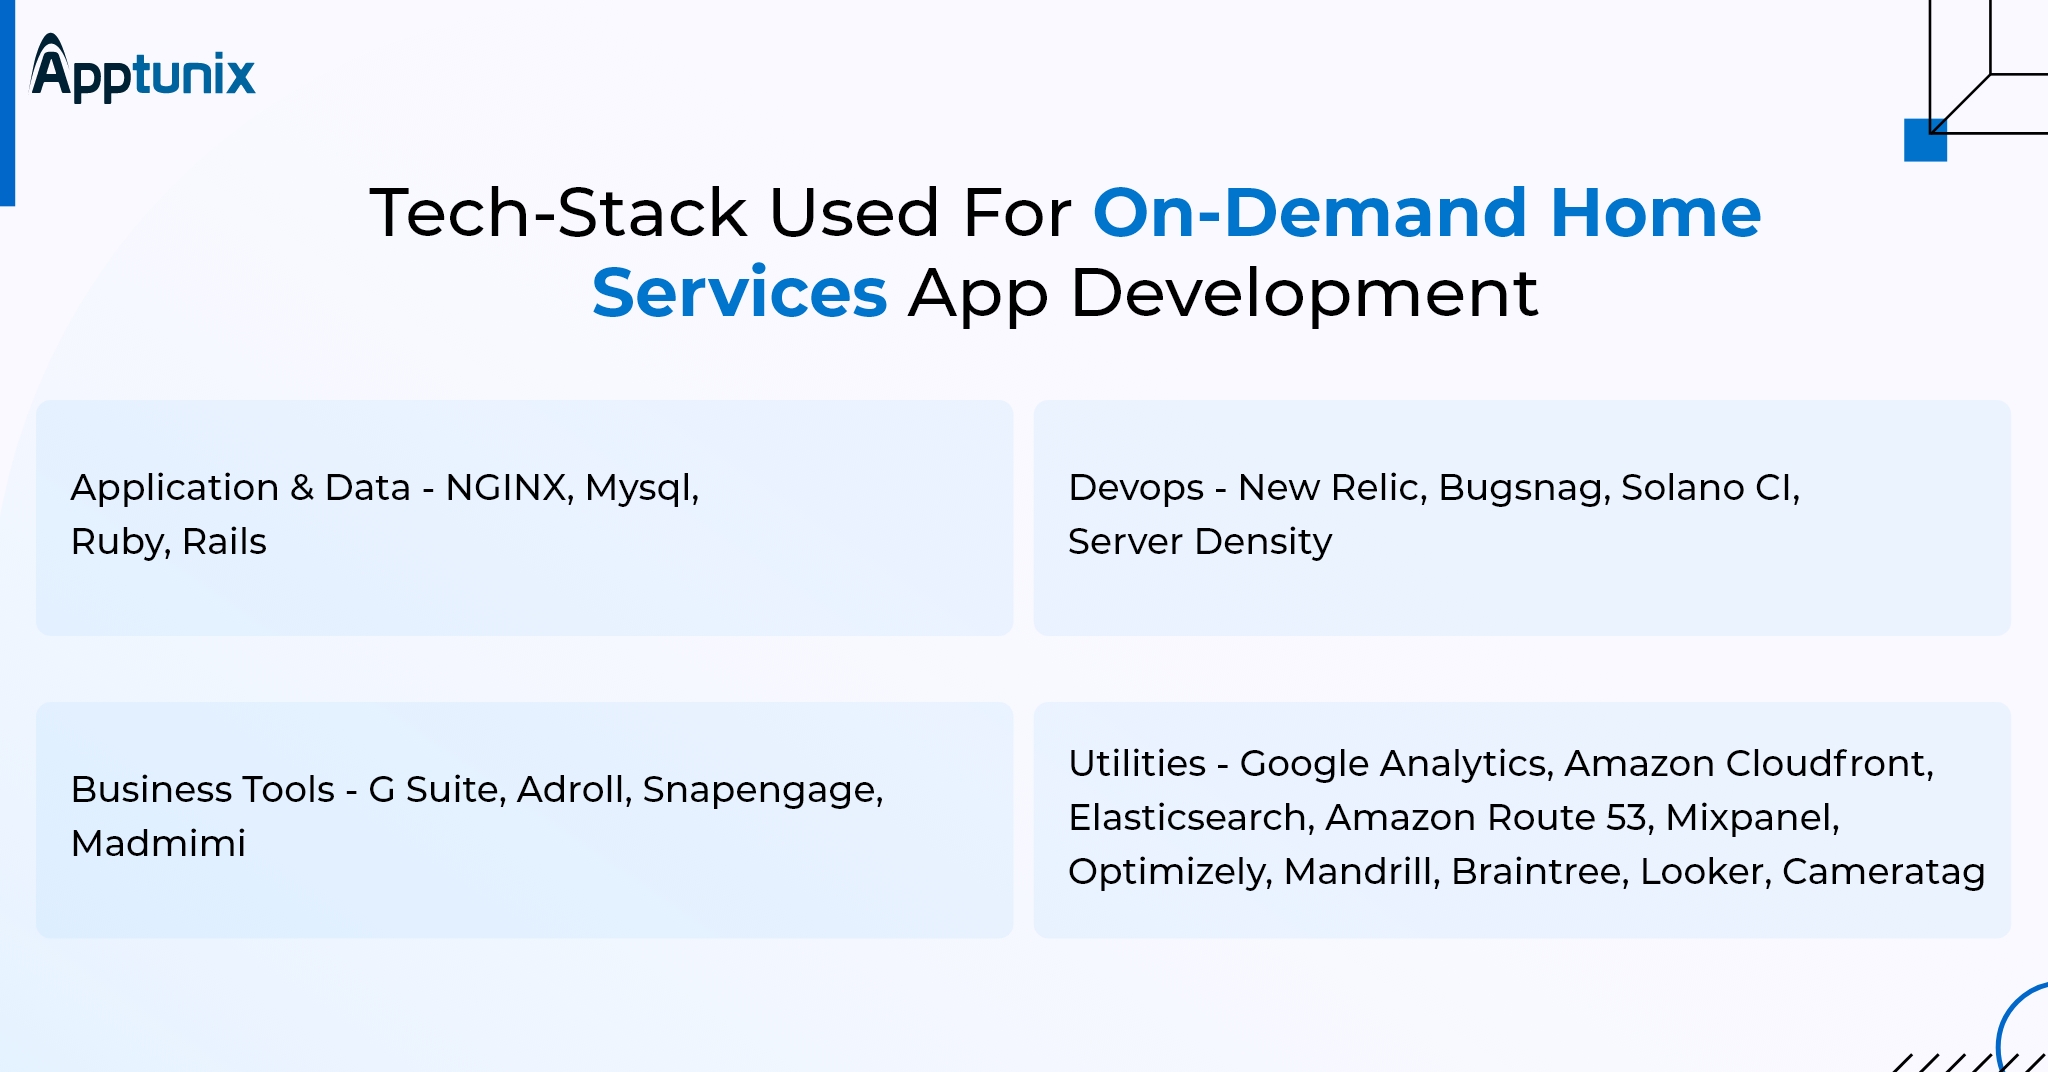 tech stack for on-demand home services apps